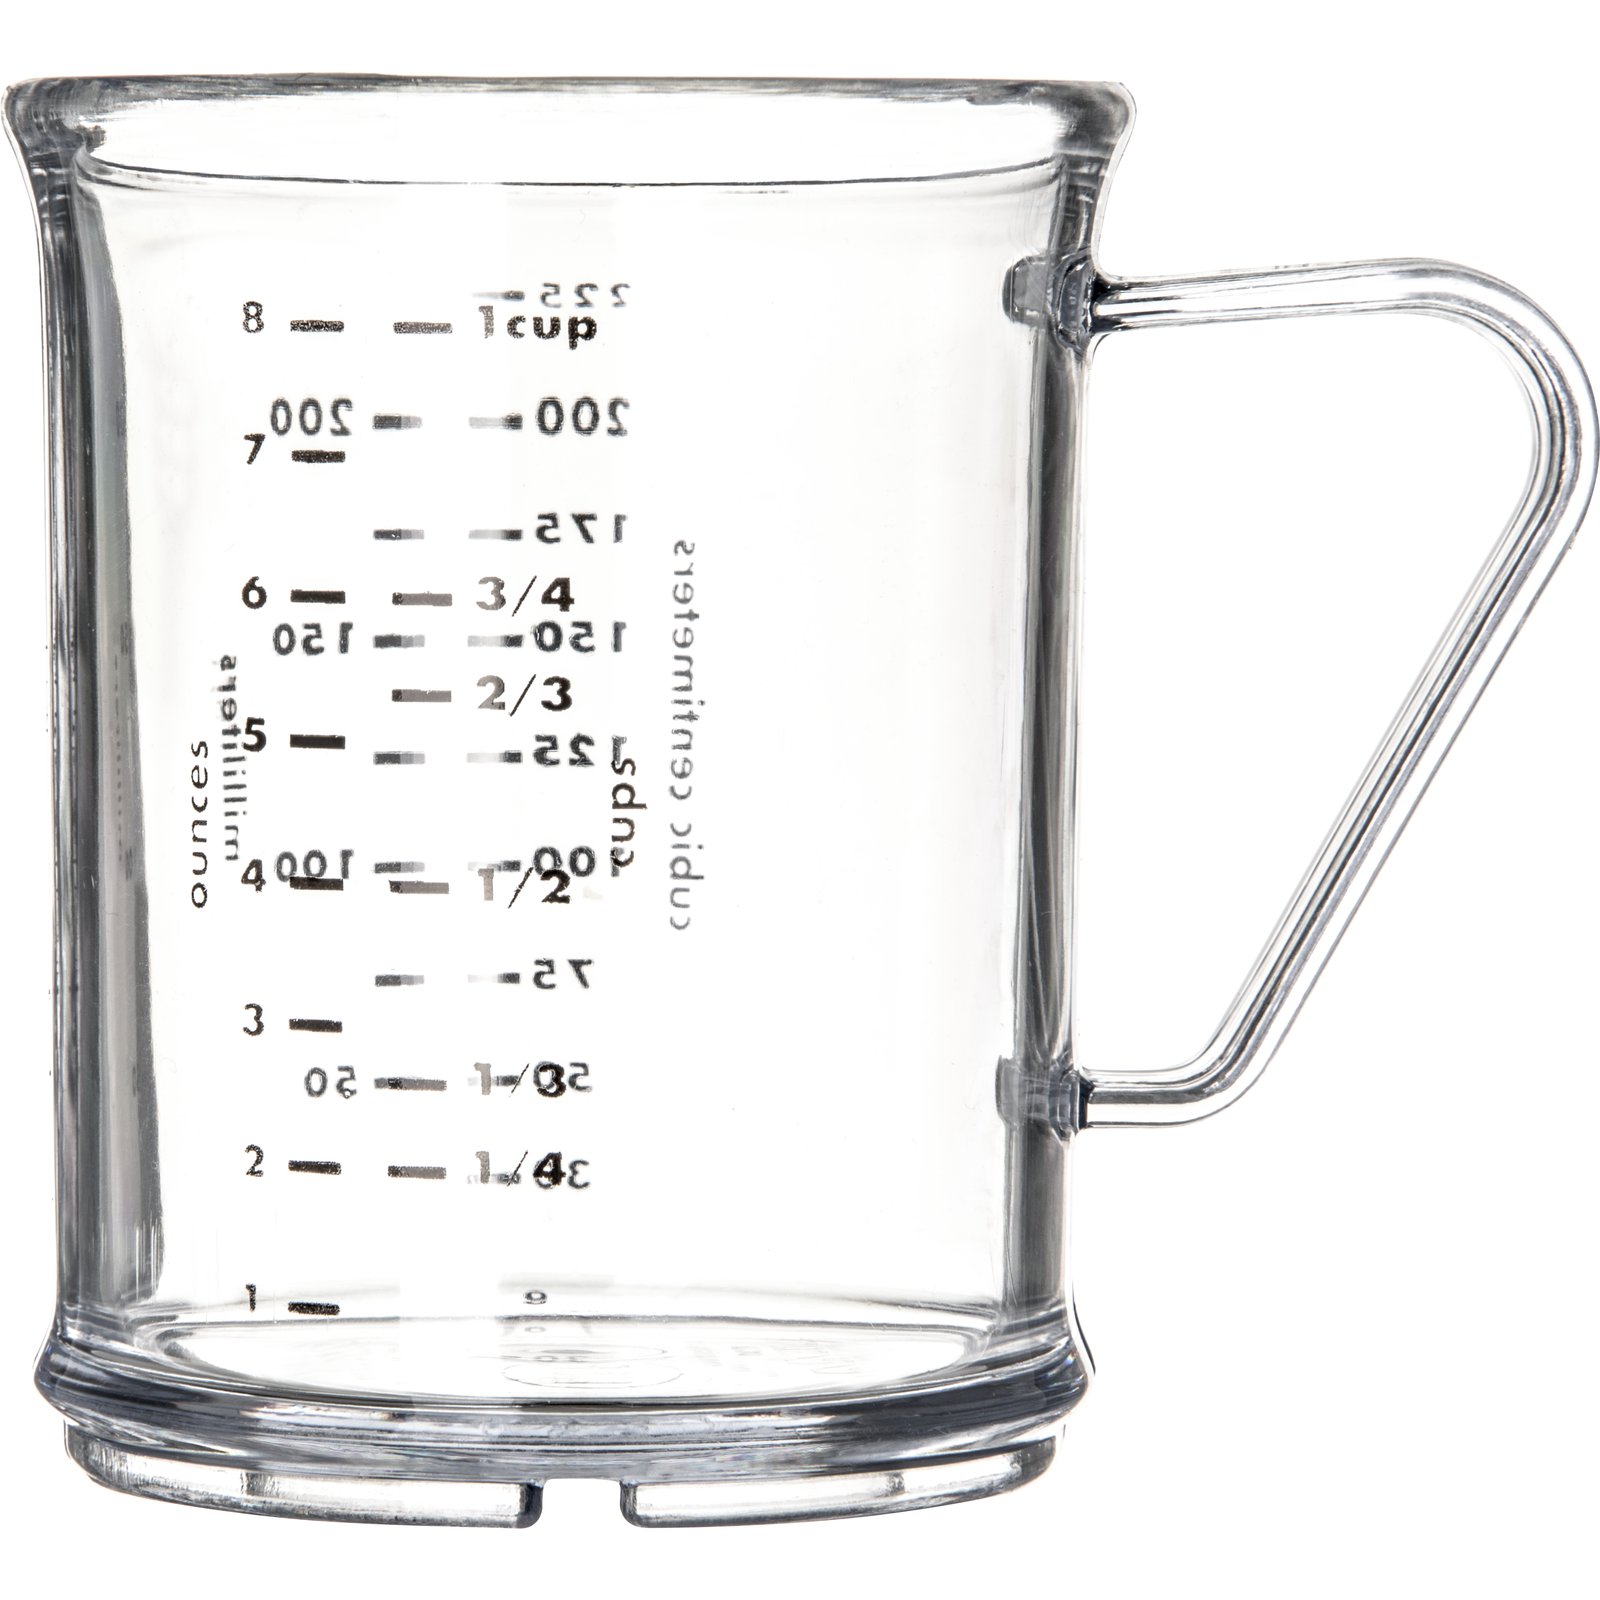  1 8 cup measuring 30ml measuring cup 15×6×4 2pcs